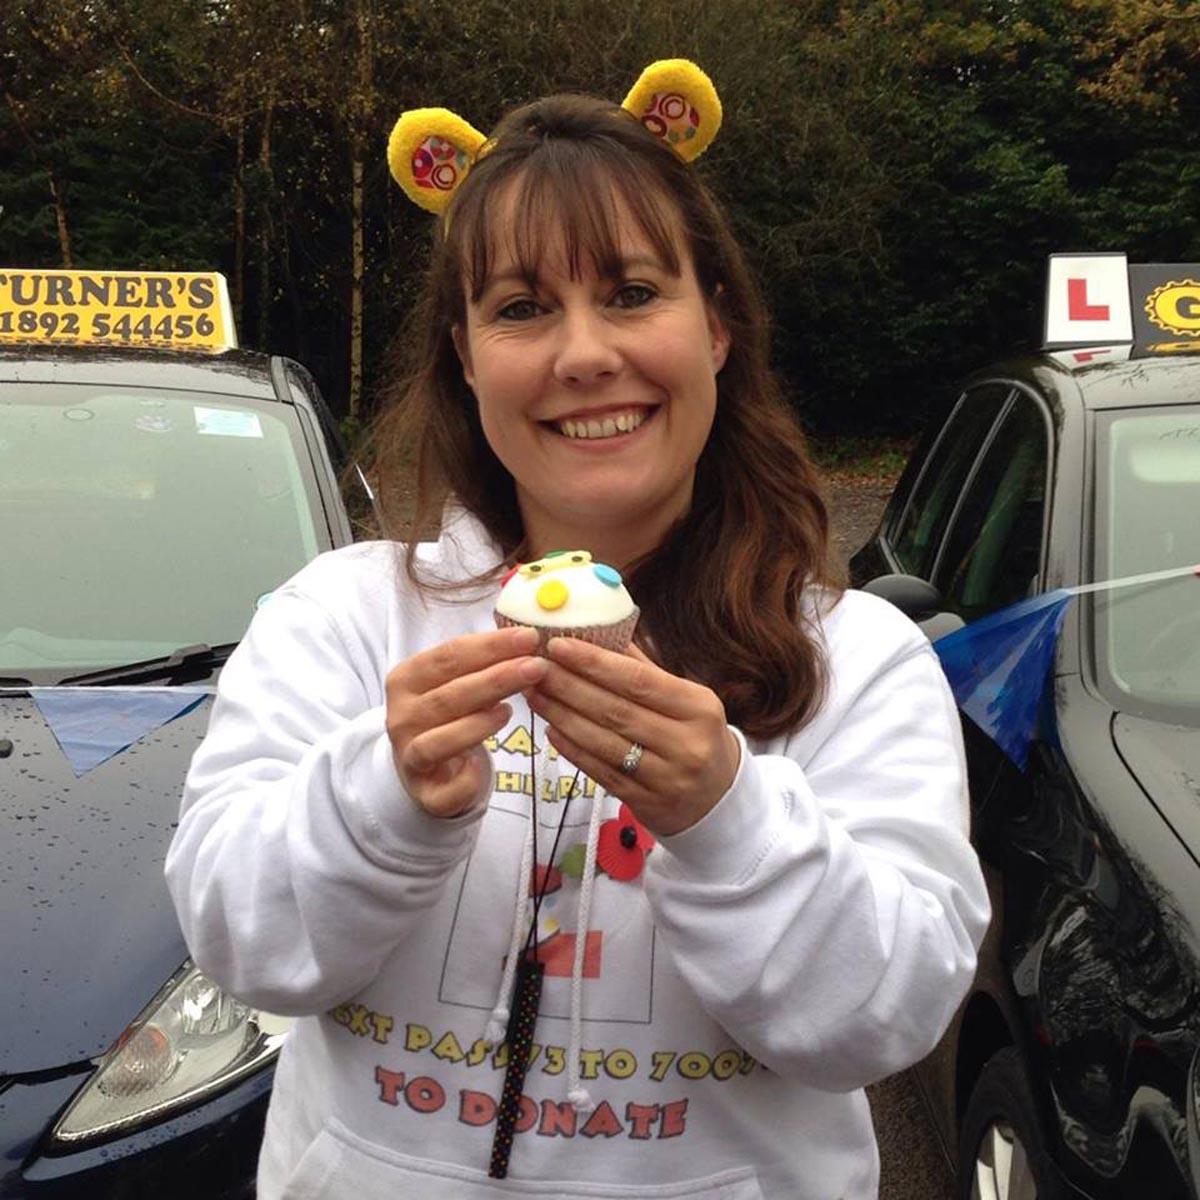 Pictures from Children in Need events from across Hampshire